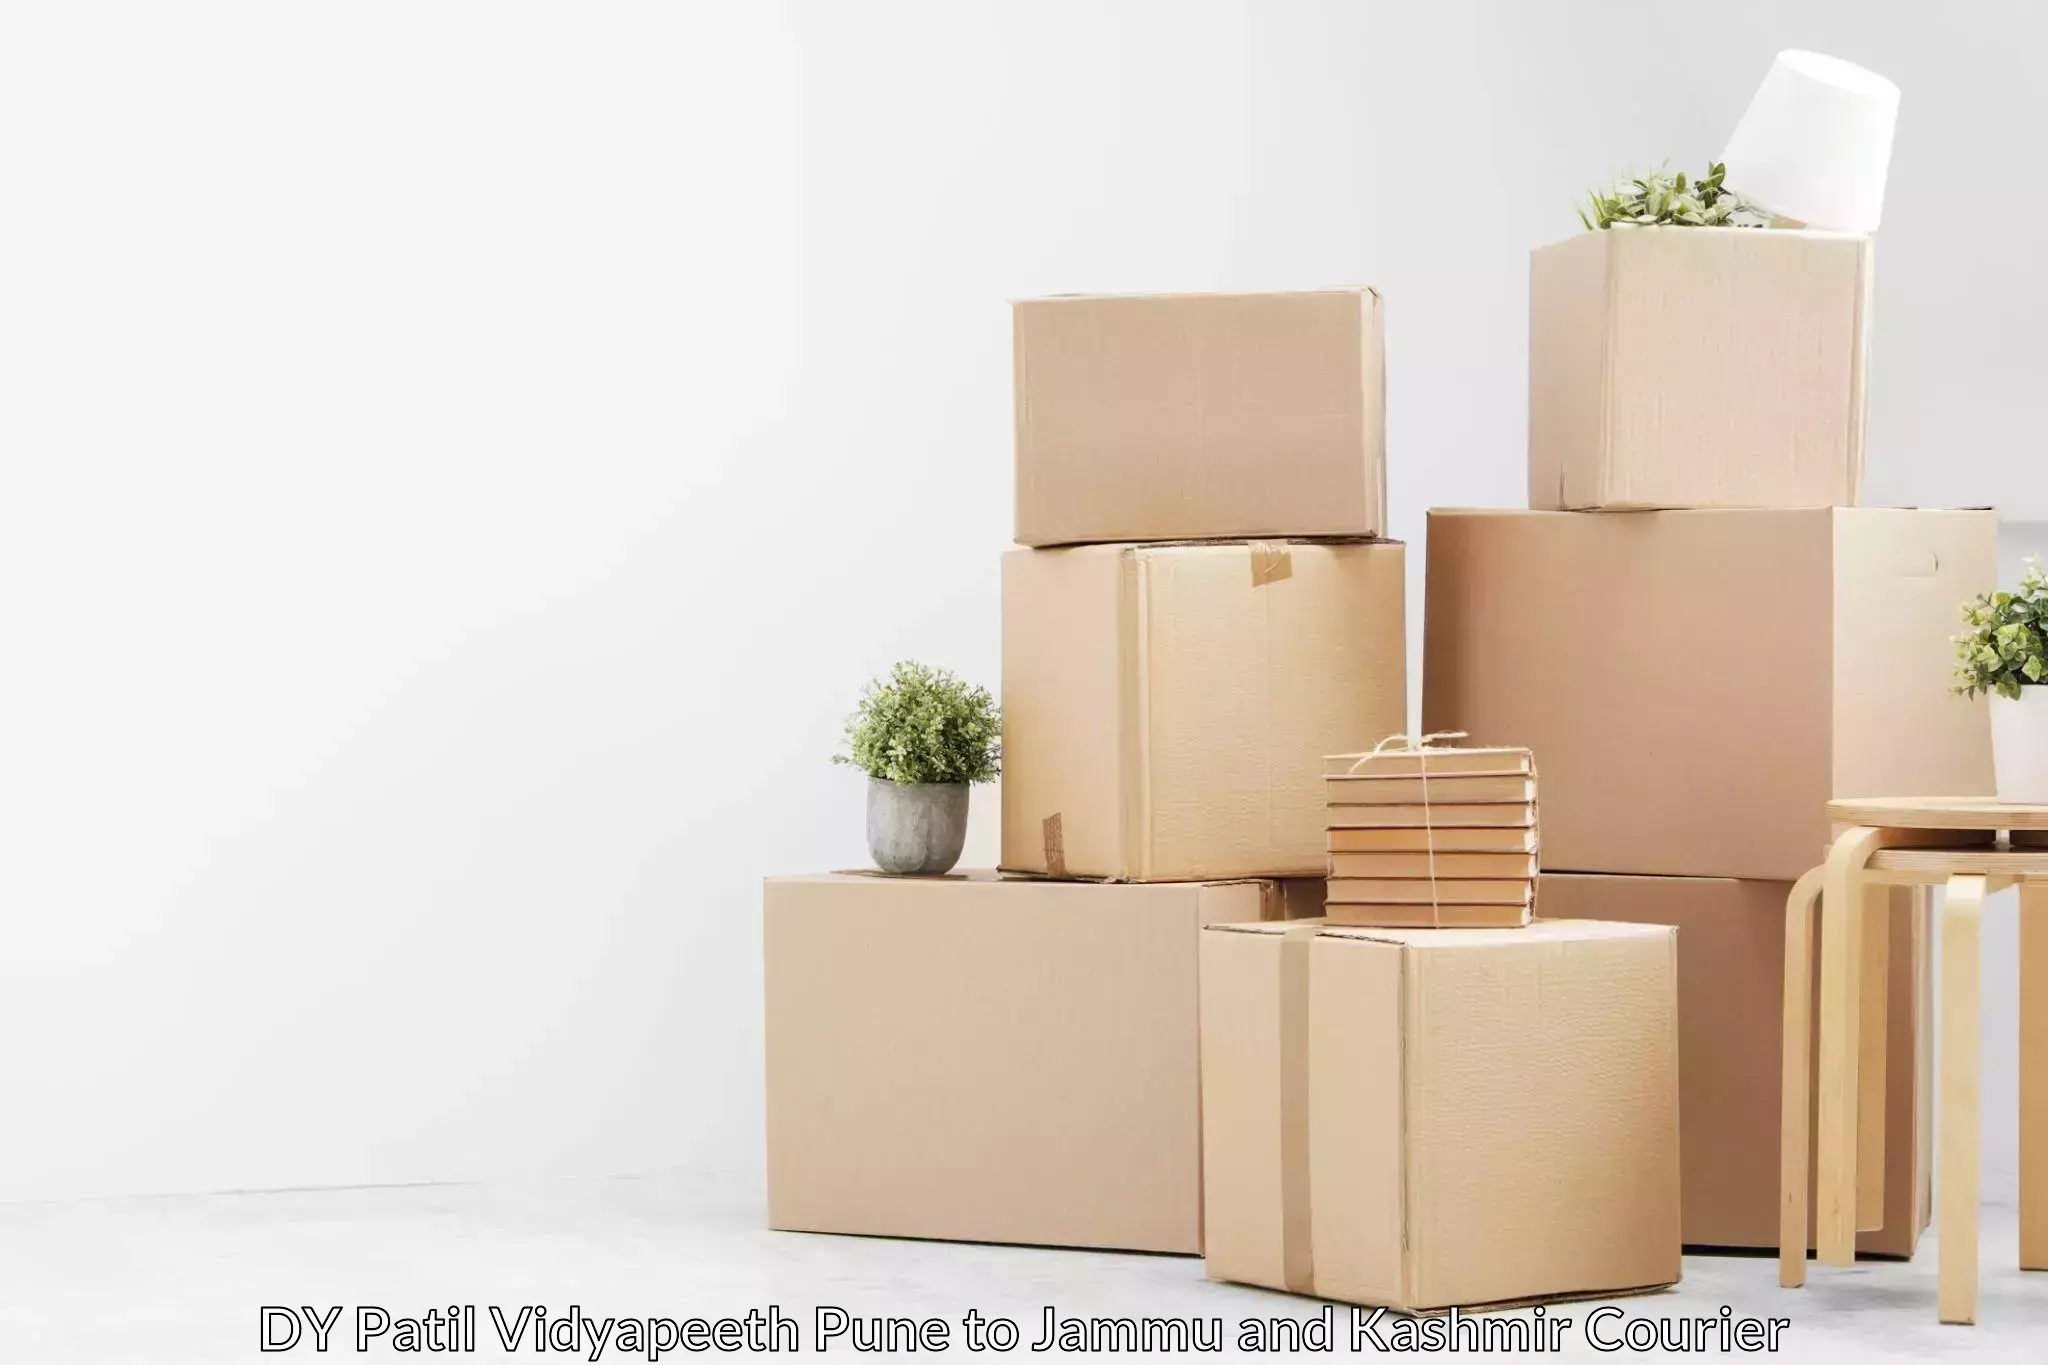 Professional relocation services DY Patil Vidyapeeth Pune to Pulwama